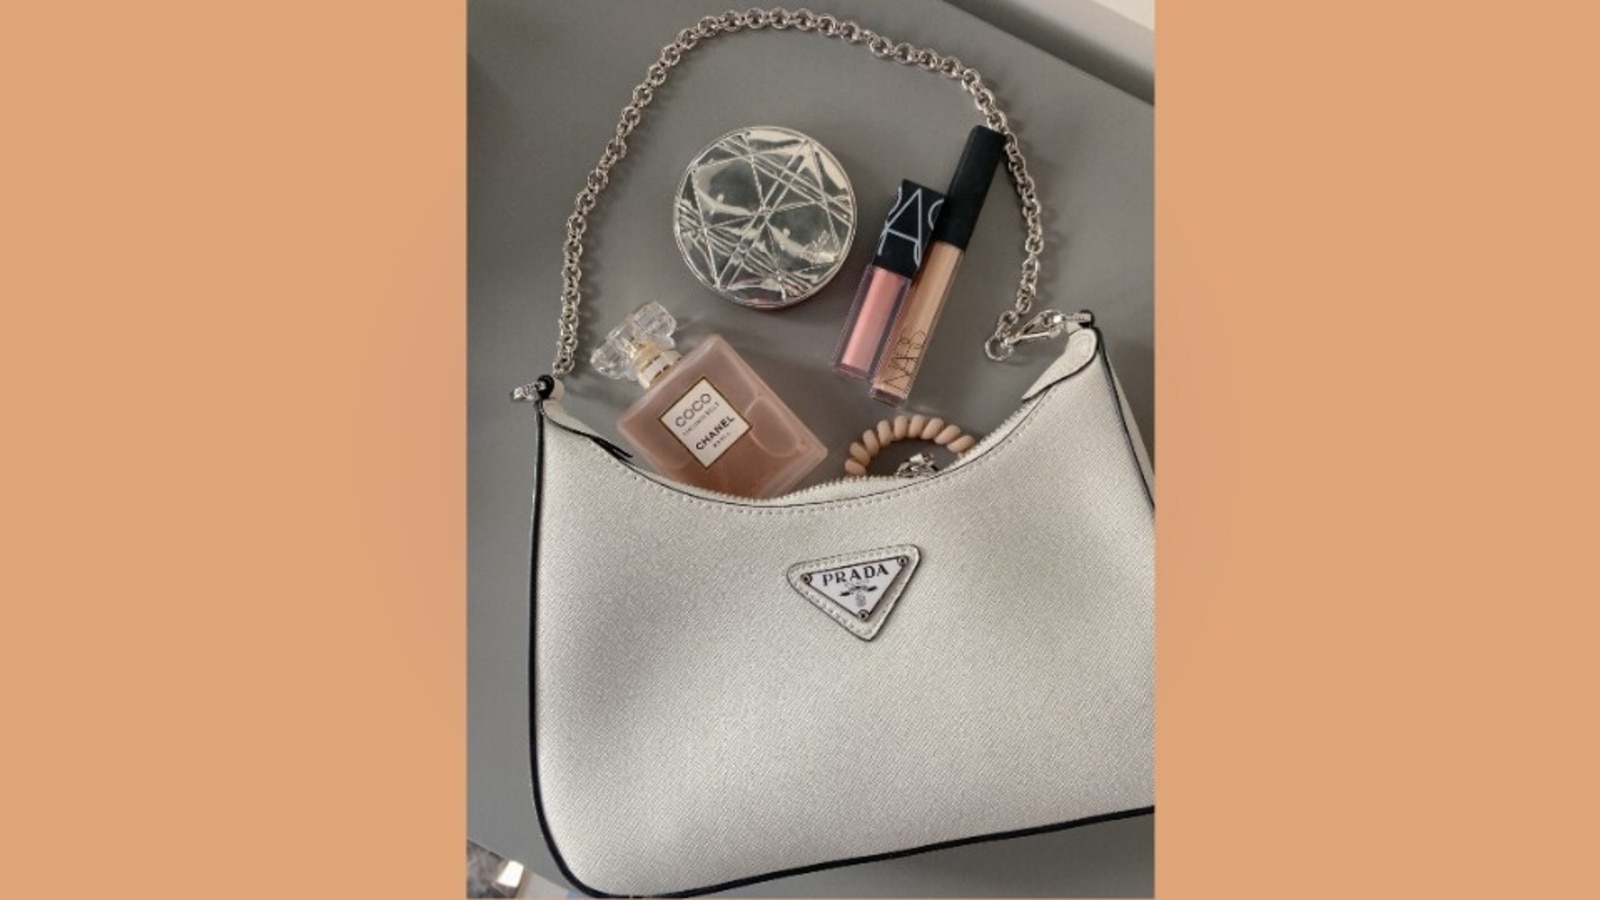 Fashion tips: Handbag essentials that every woman should always carry